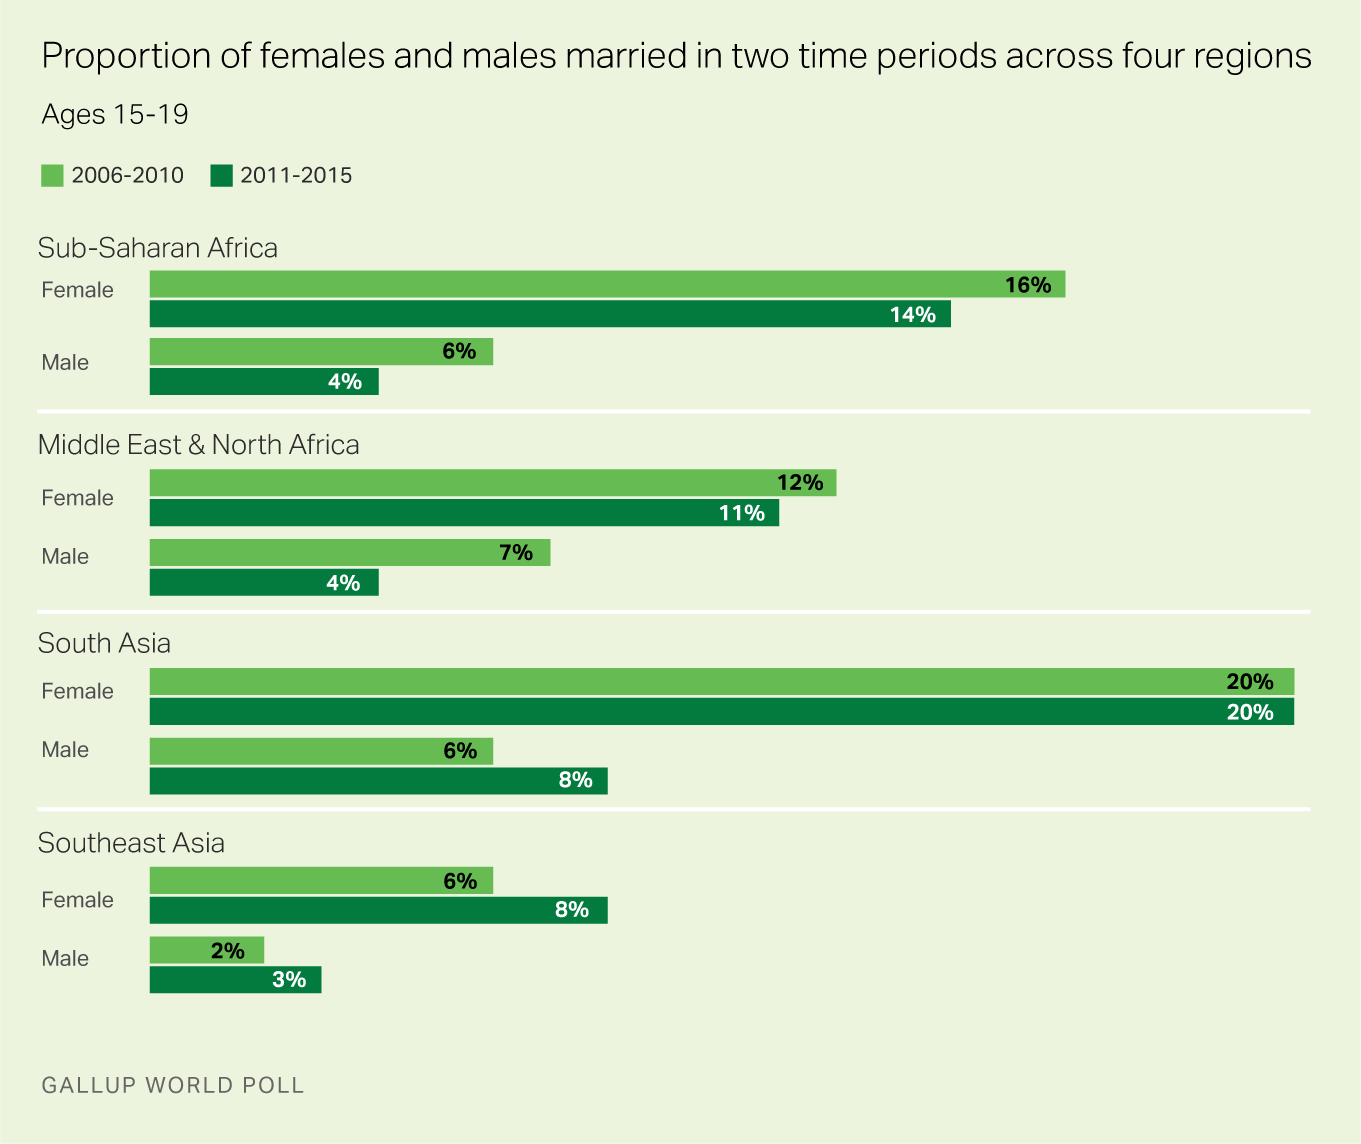 Proportion of females and males married in two time periods across four regions